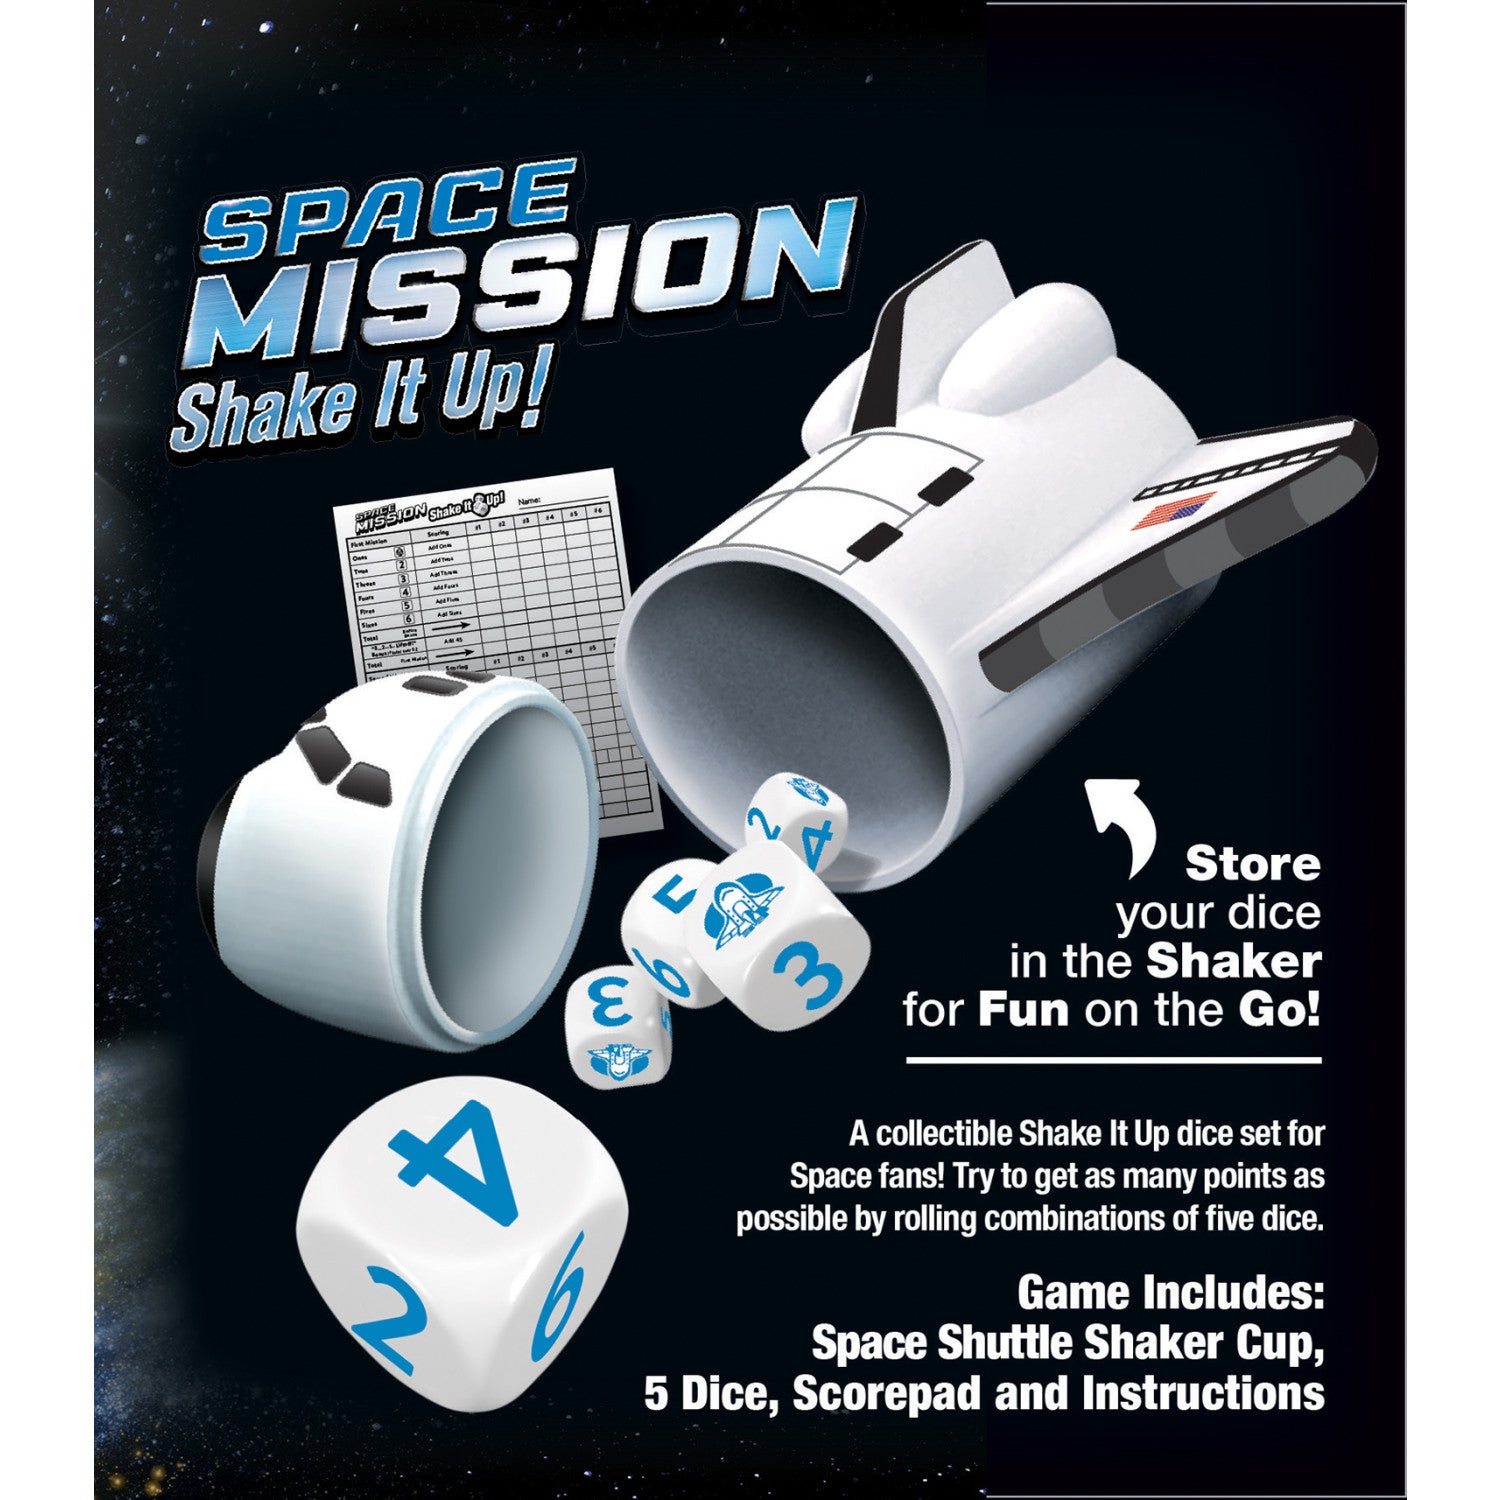 Space Mission Shake It Up!